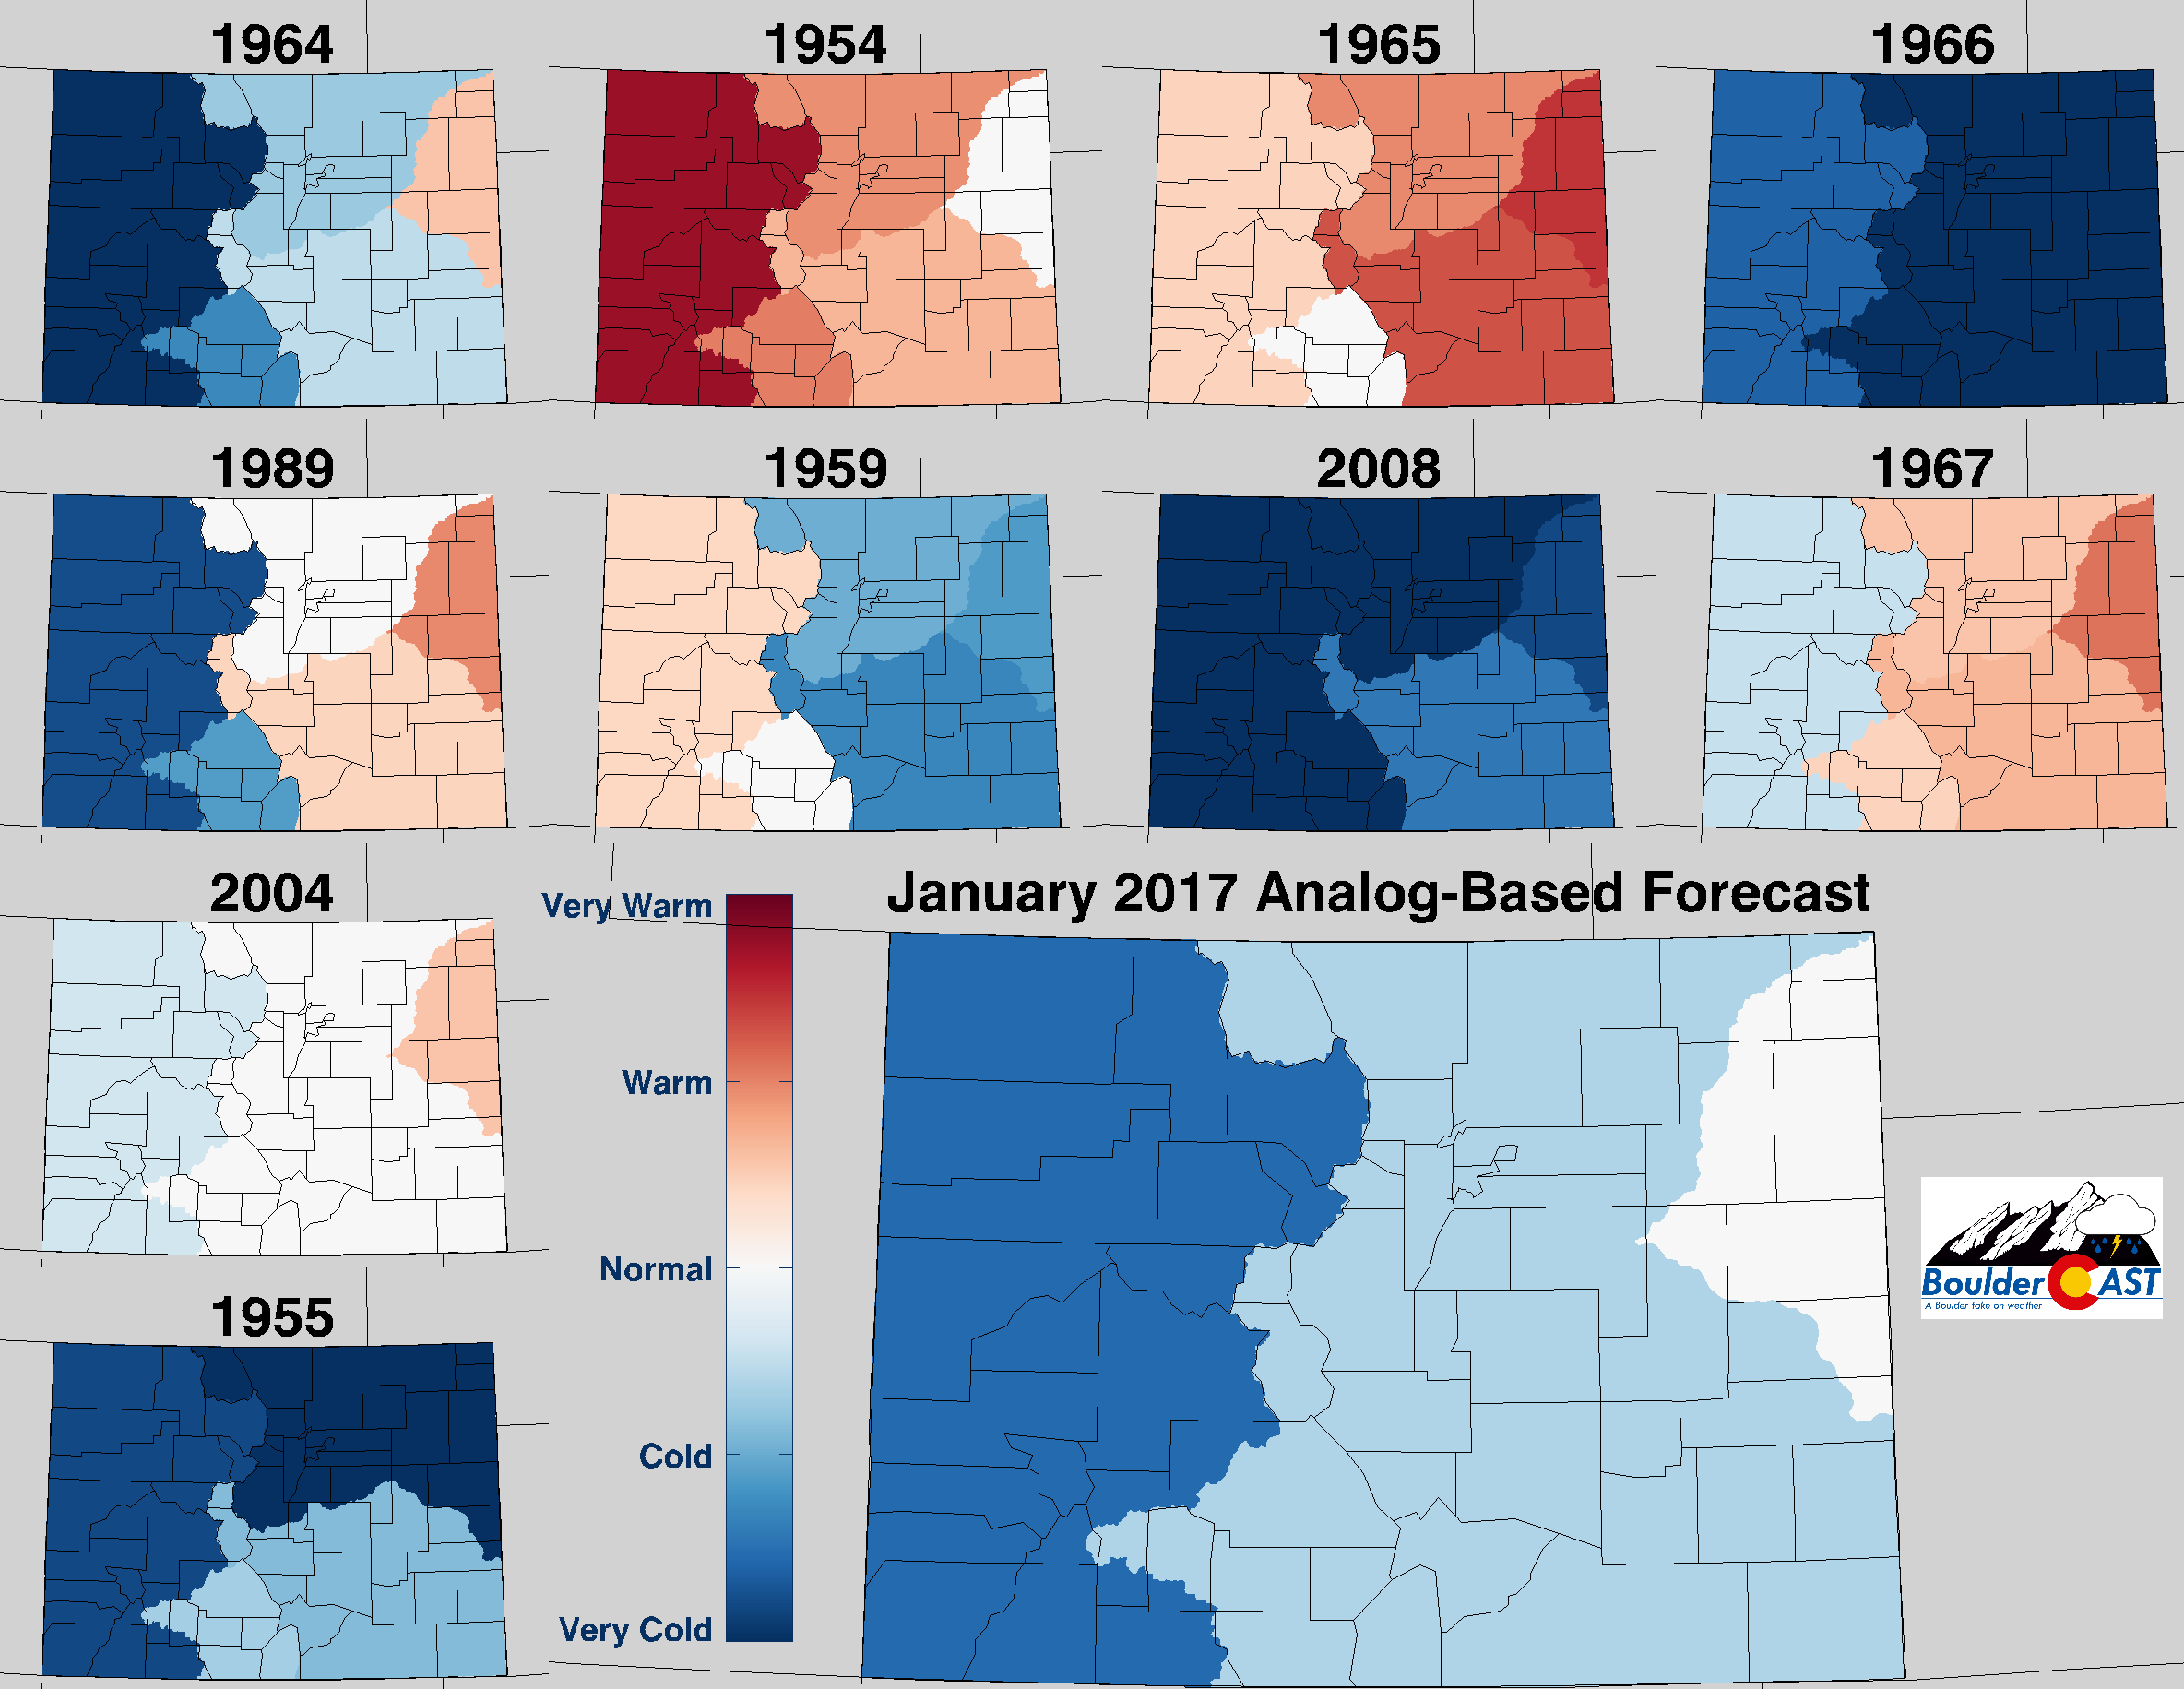 Top 10 Analogs to 2016 and how those years played for TEMPERATURE in Colorado during the month of January. The large map shows the analog-based weighted consensus forecast based on those 10 years.